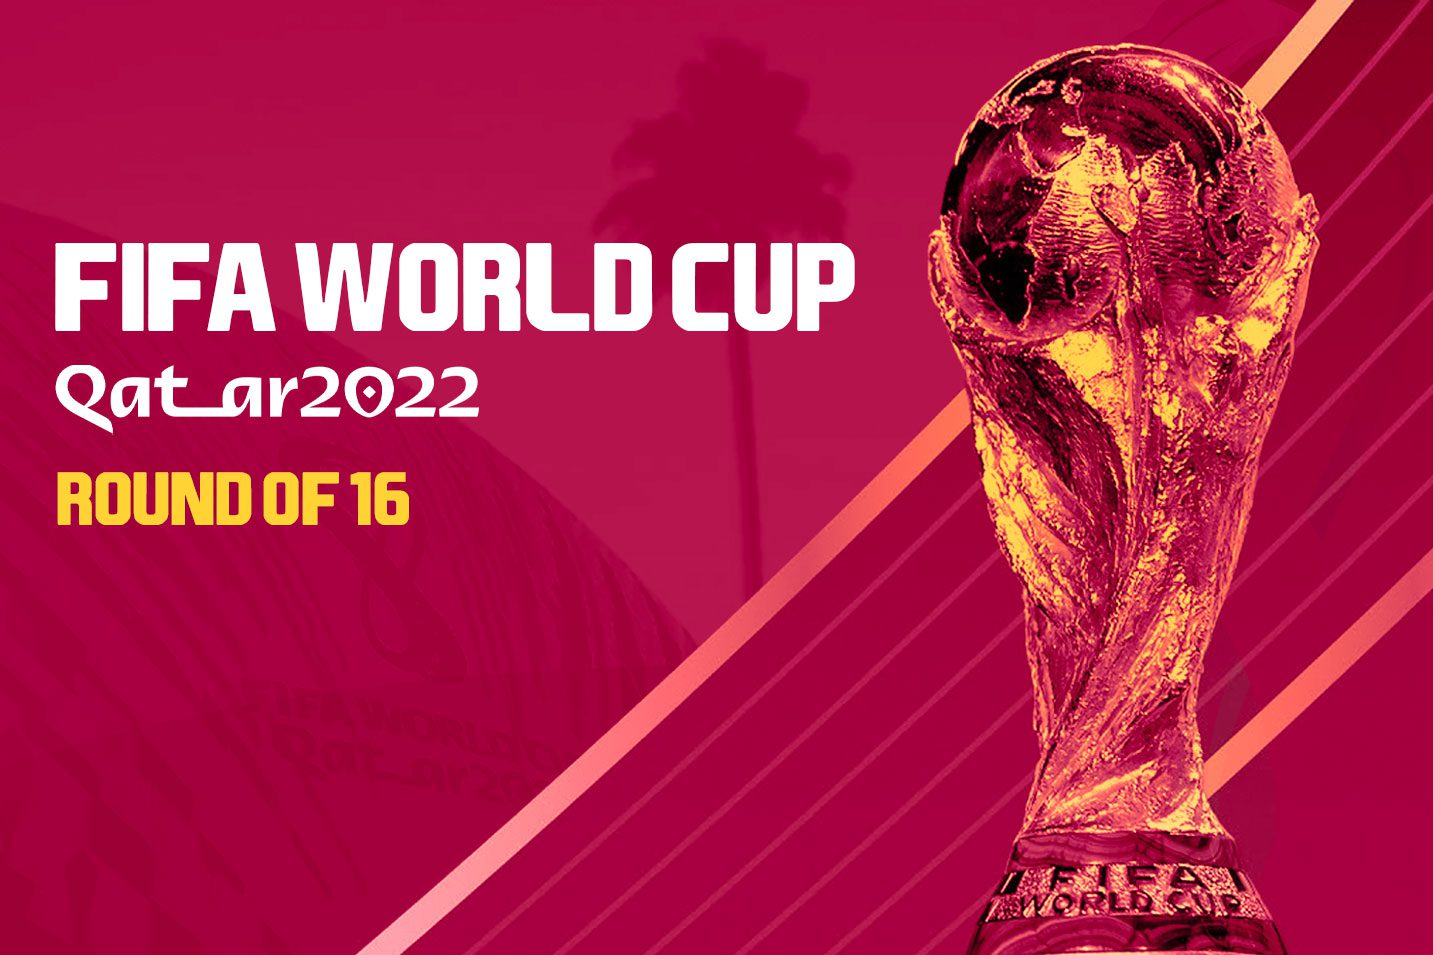 World Cup round of 16 betting picks